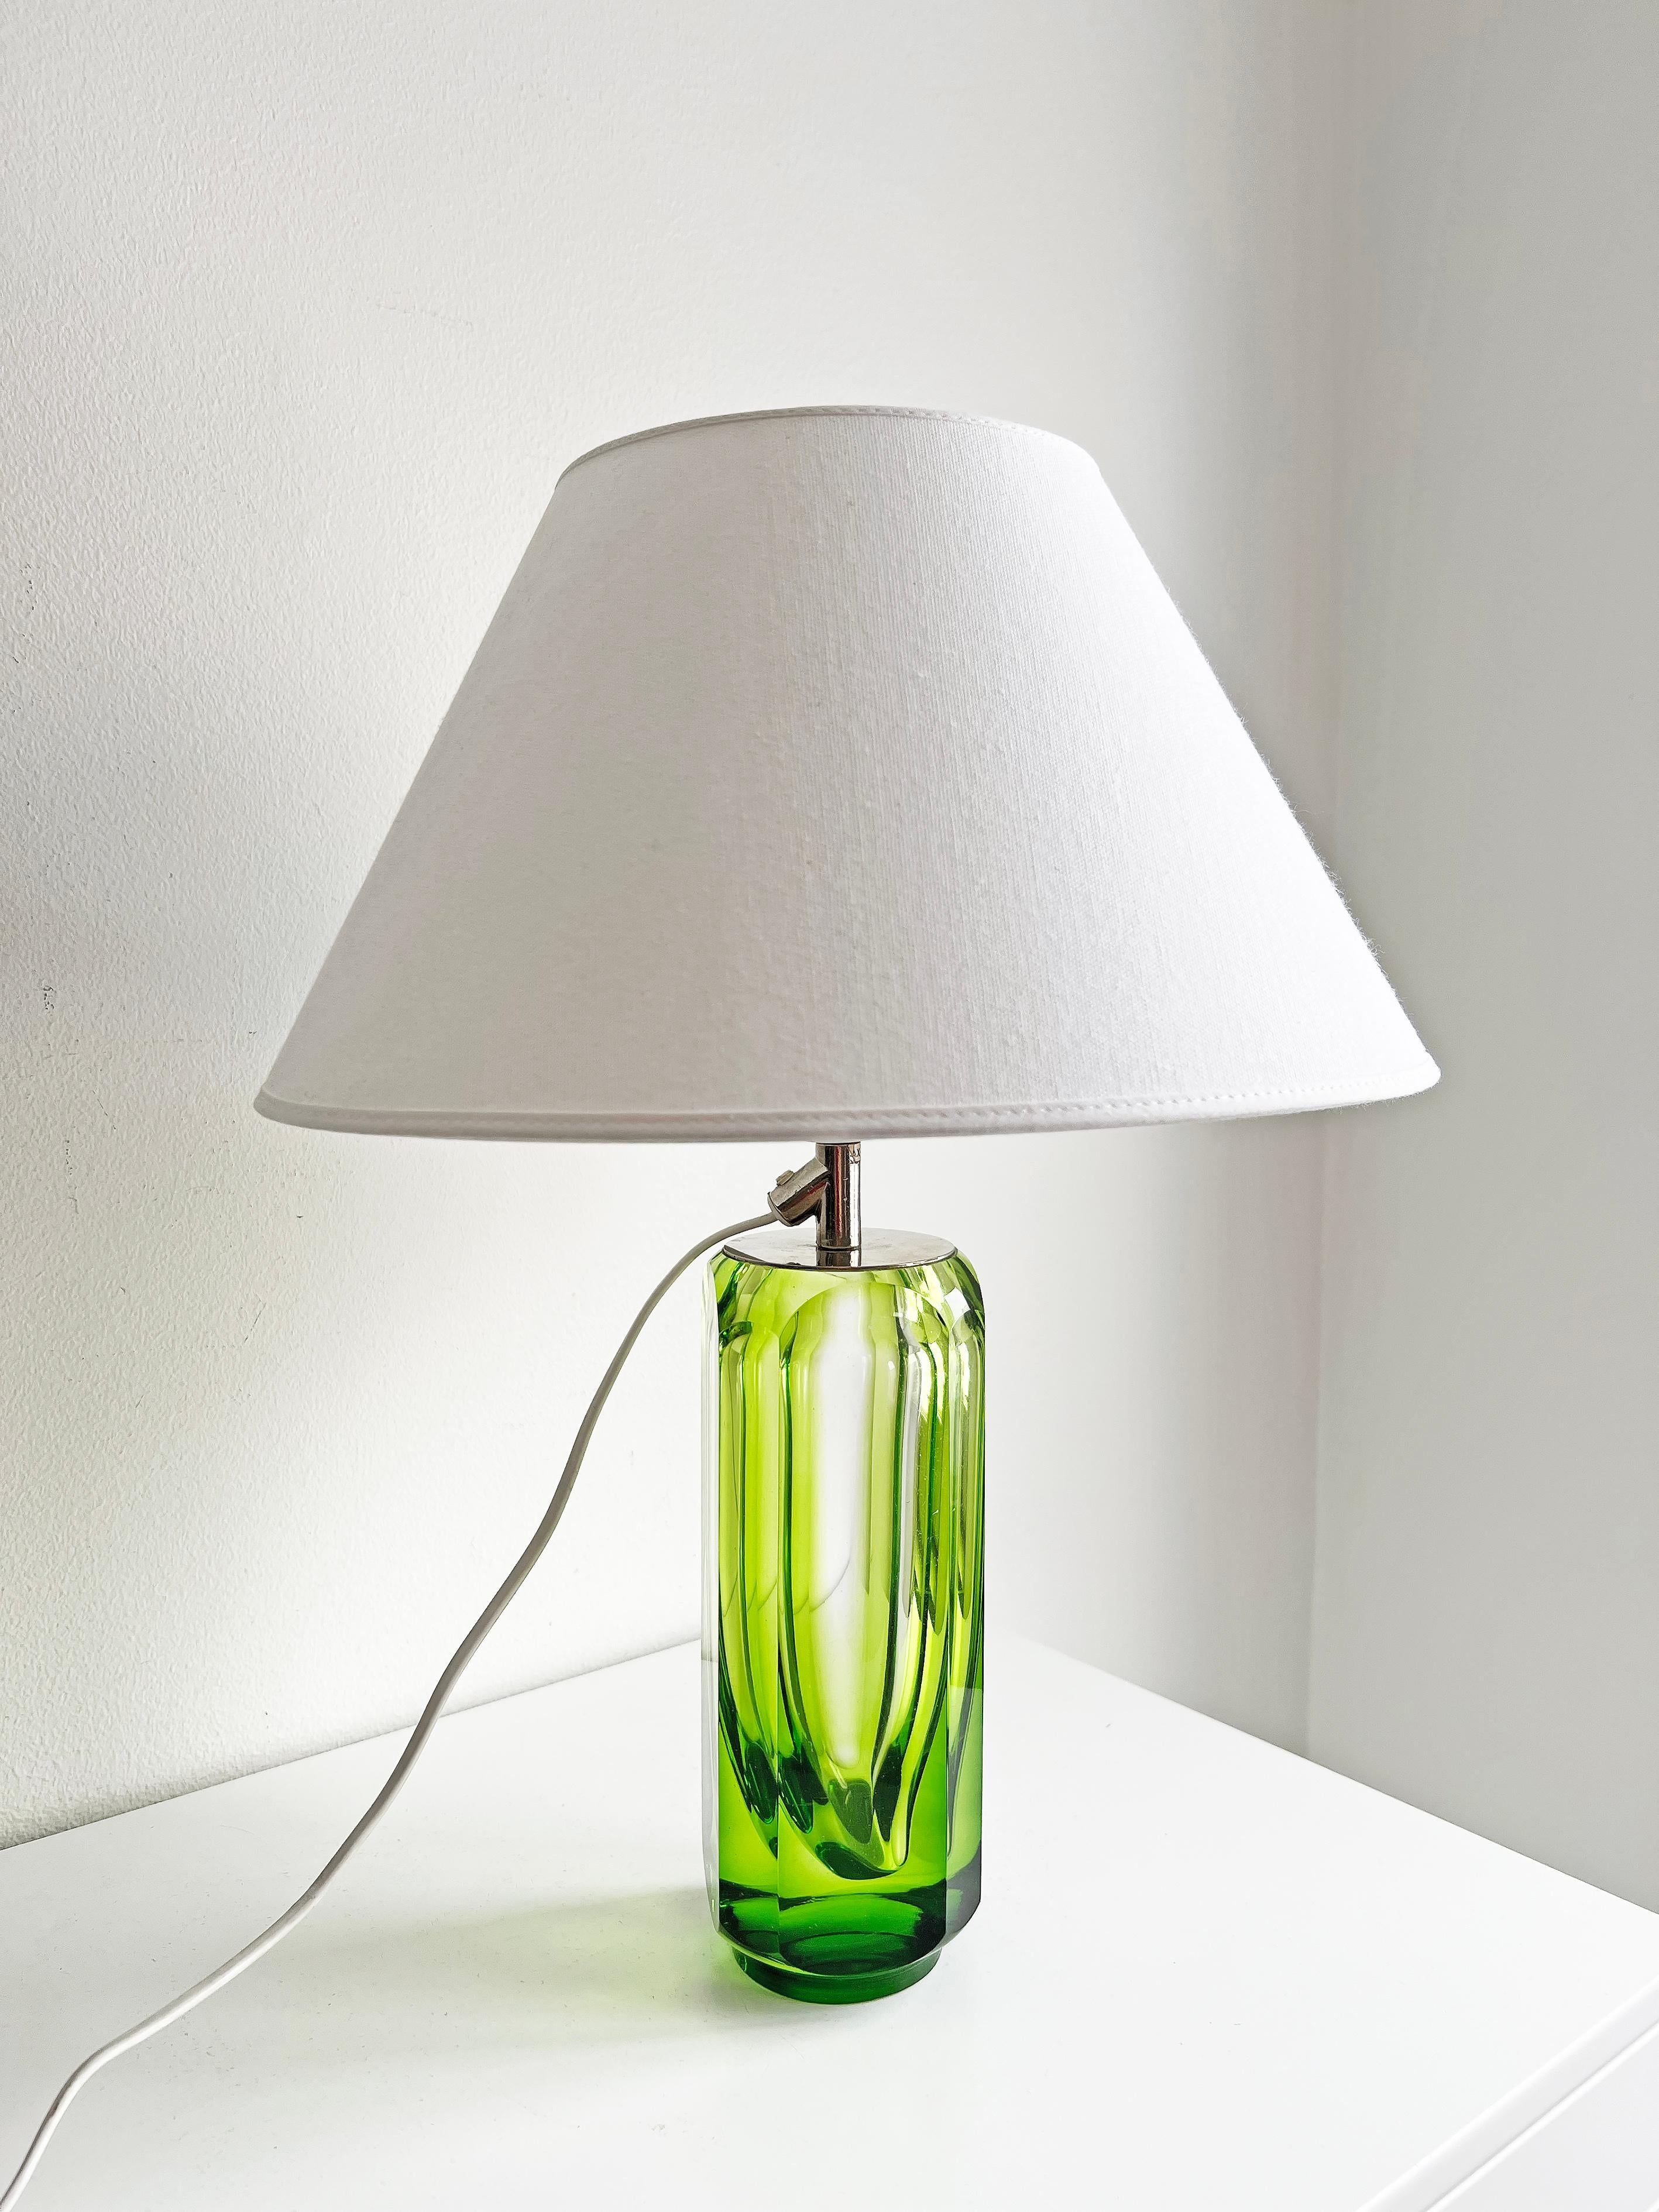 Rare table lamp with amazing green color from Reijmyre -1971.
This model is featured in Reijmyre's catalog from 1971, as shown in the last pictures.
Signed in the bottom. 
Please notice, the shade is not included. 
We recommend this lamp to be